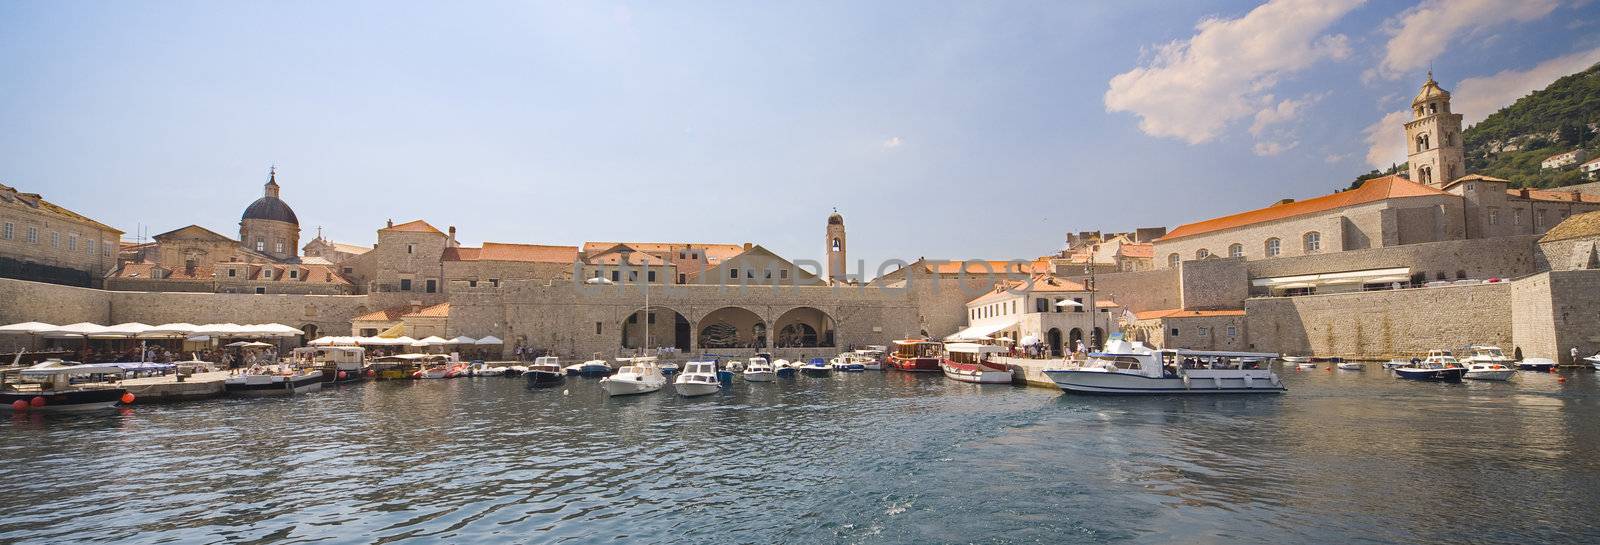 Dubrovnik, Croatia - view from seaside on the old port